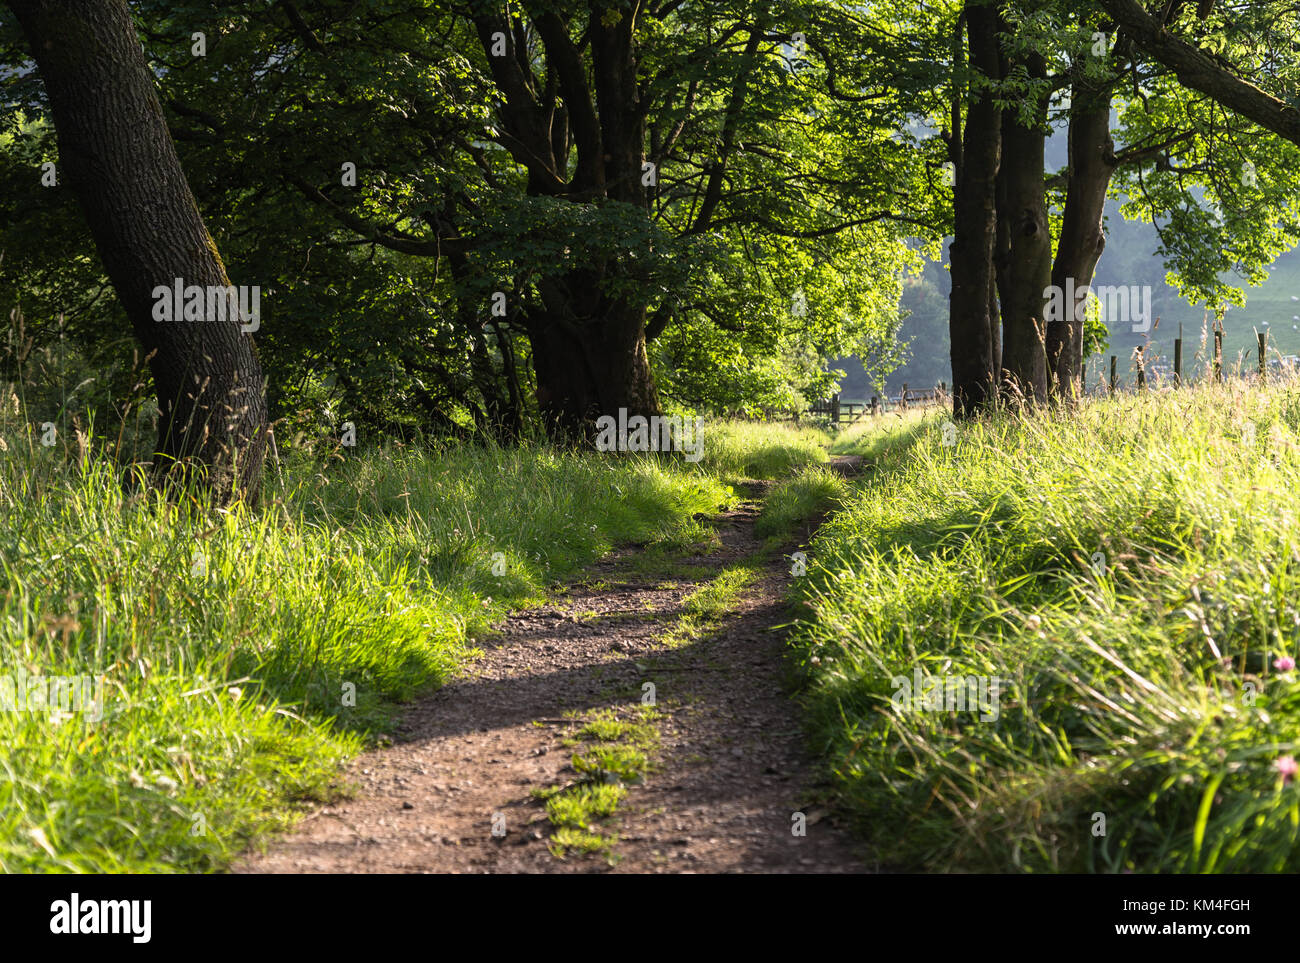 The Dales Way footpath at Buckden in the Yorkshire Dales National Park, England Stock Photo